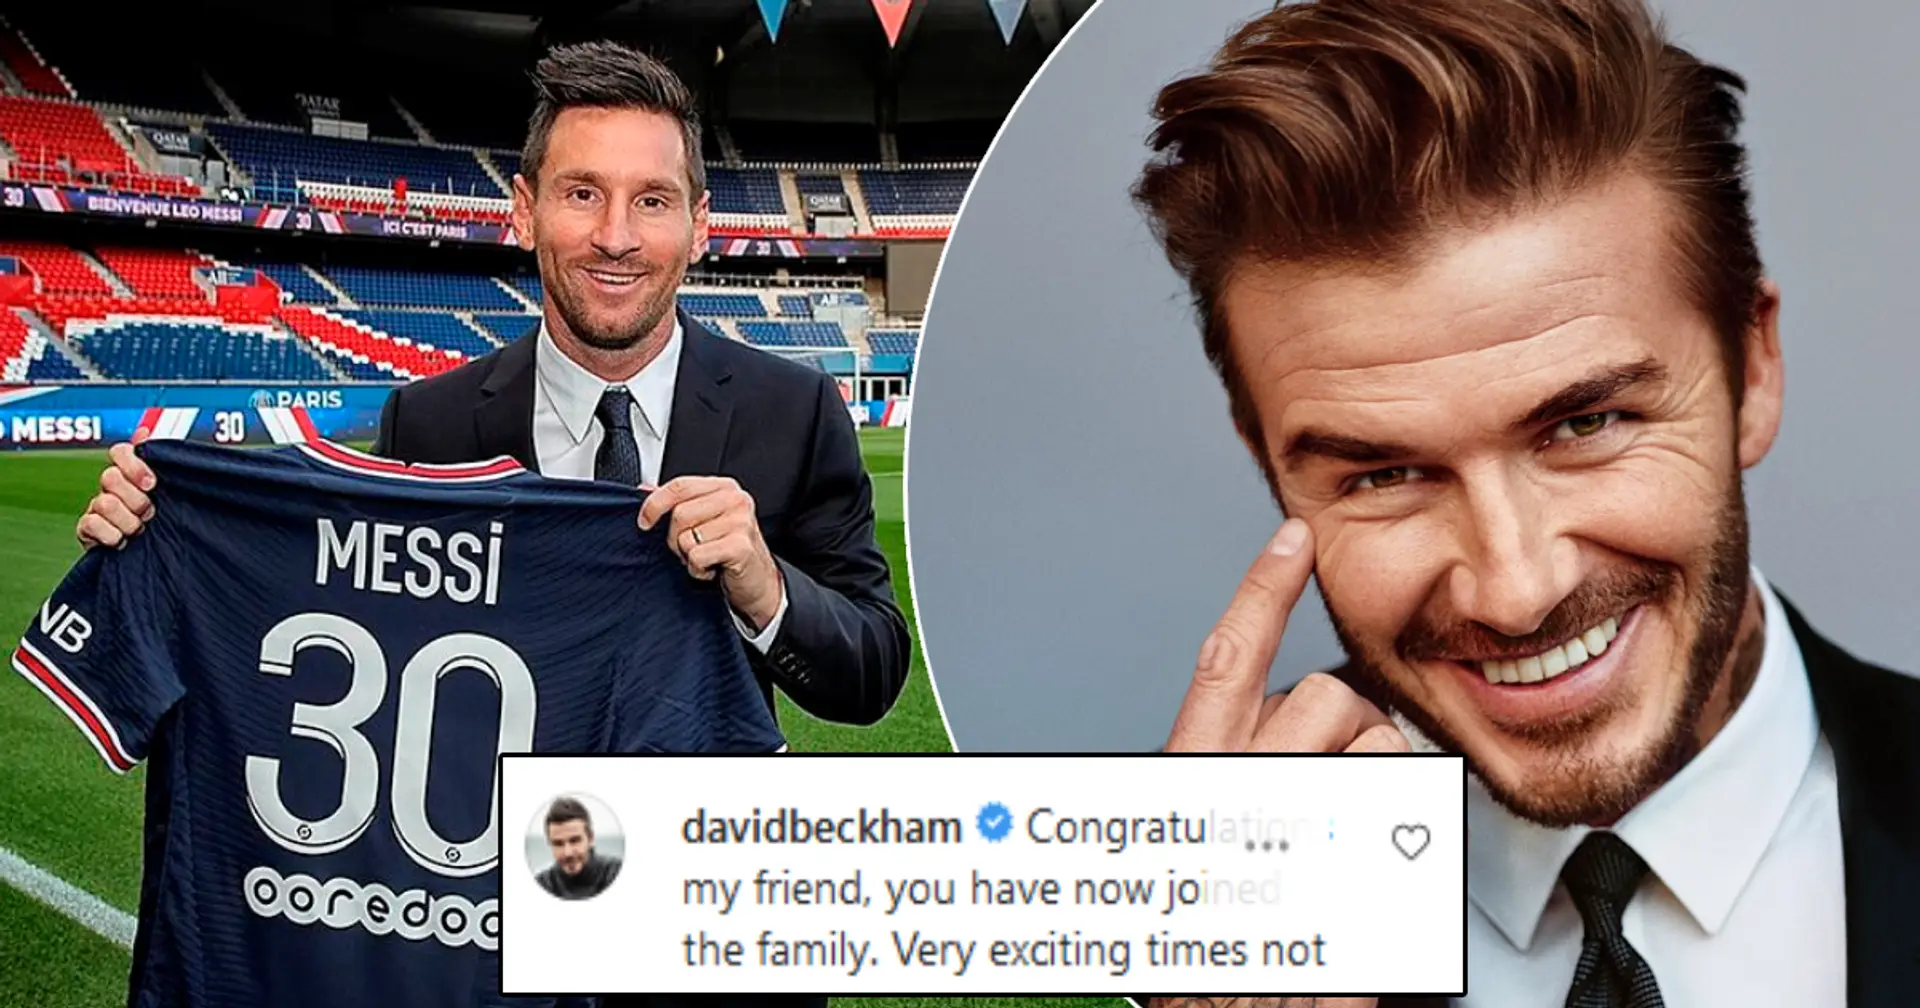 'Exciting times for France': Beckham leads procession of legends and stars welcoming Messi to PSG on Instagram